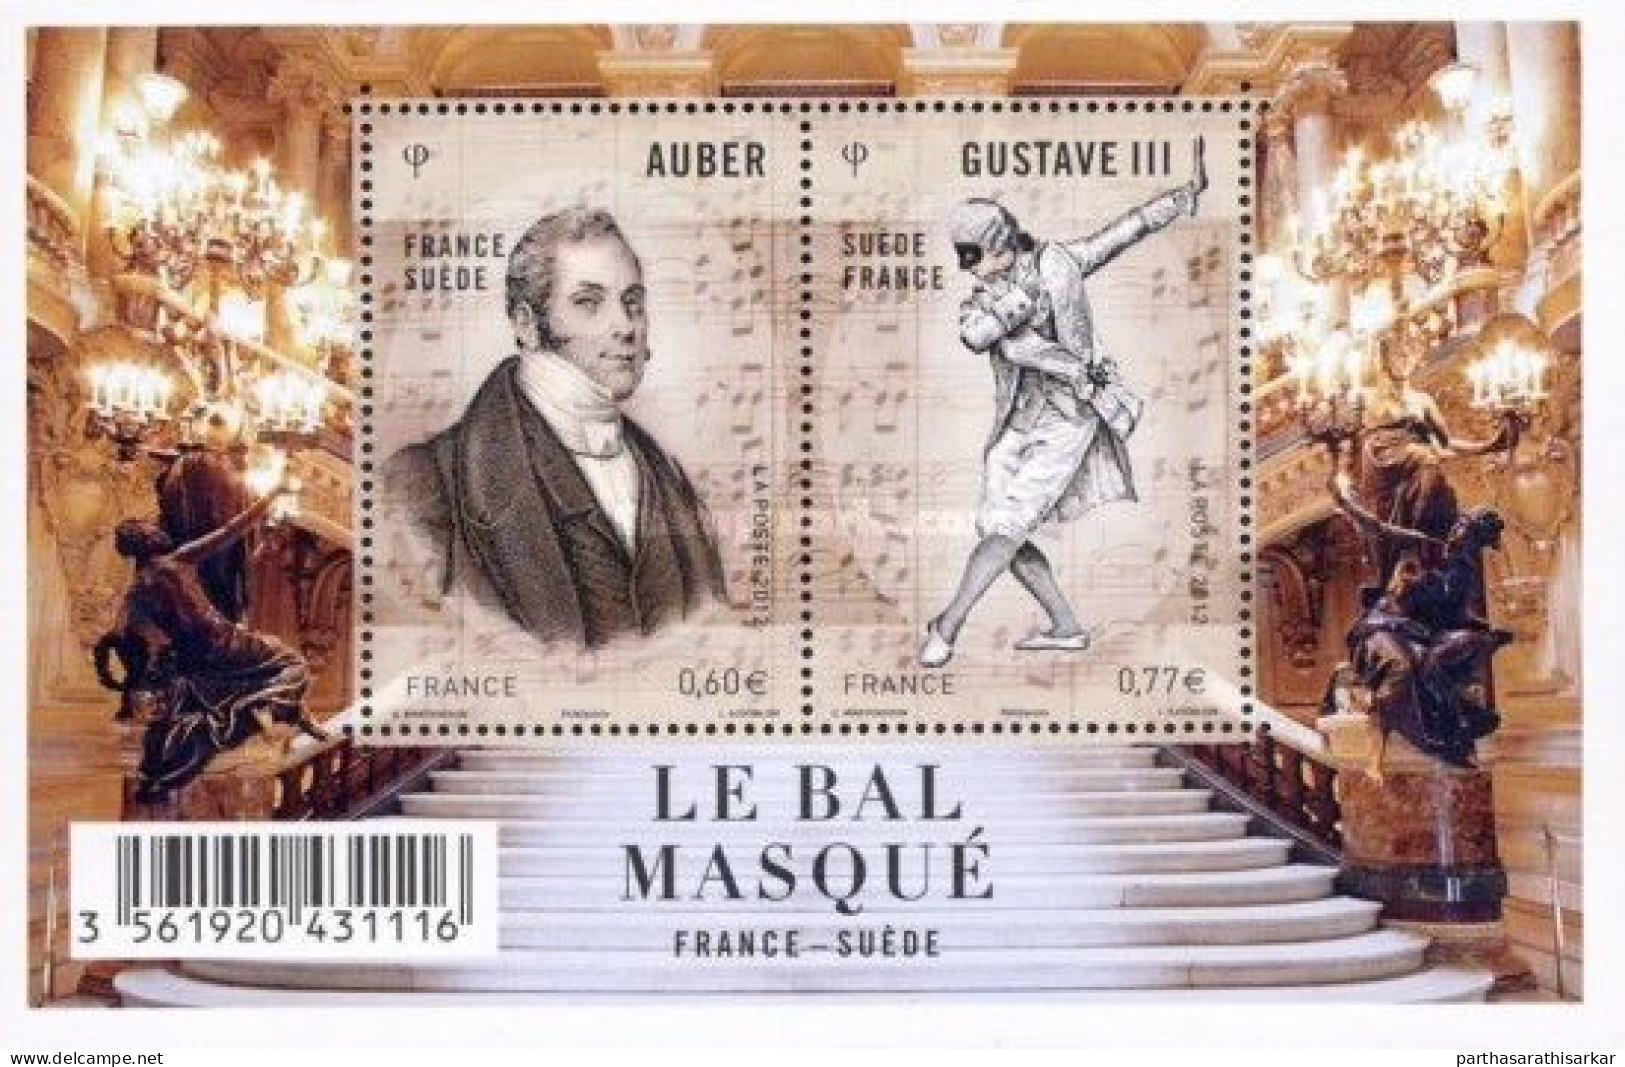 FRANCE 2012 MUSICIAN JOINT ISSUE WITH SWEDEN MINIATURE SHEET MS MNH - Joint Issues